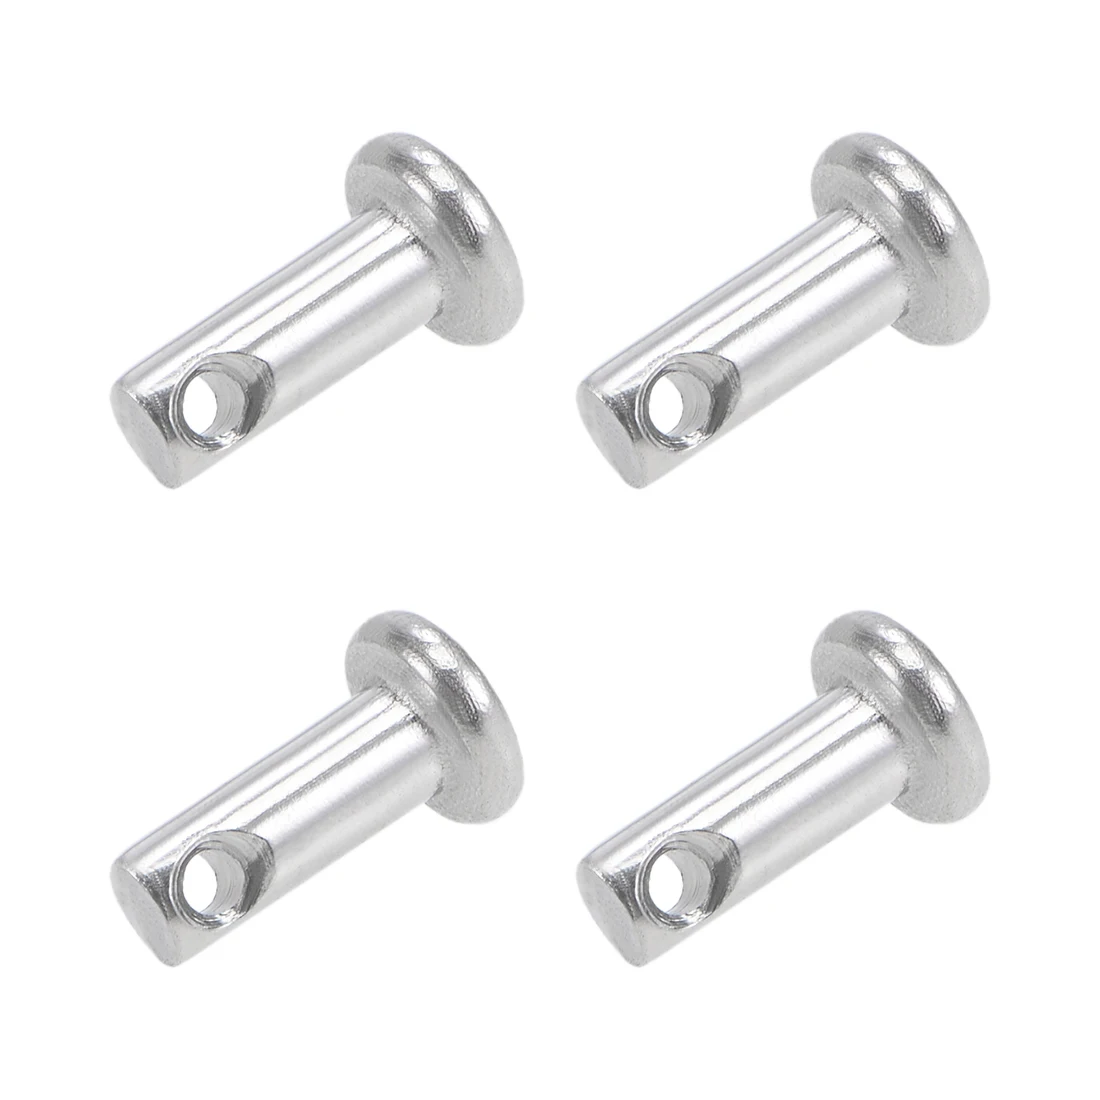 5mm X 20mm Flat Head 304 Stainless Steel Link Hinge Pin 10Pcs uxcell Single Hole Clevis Pins